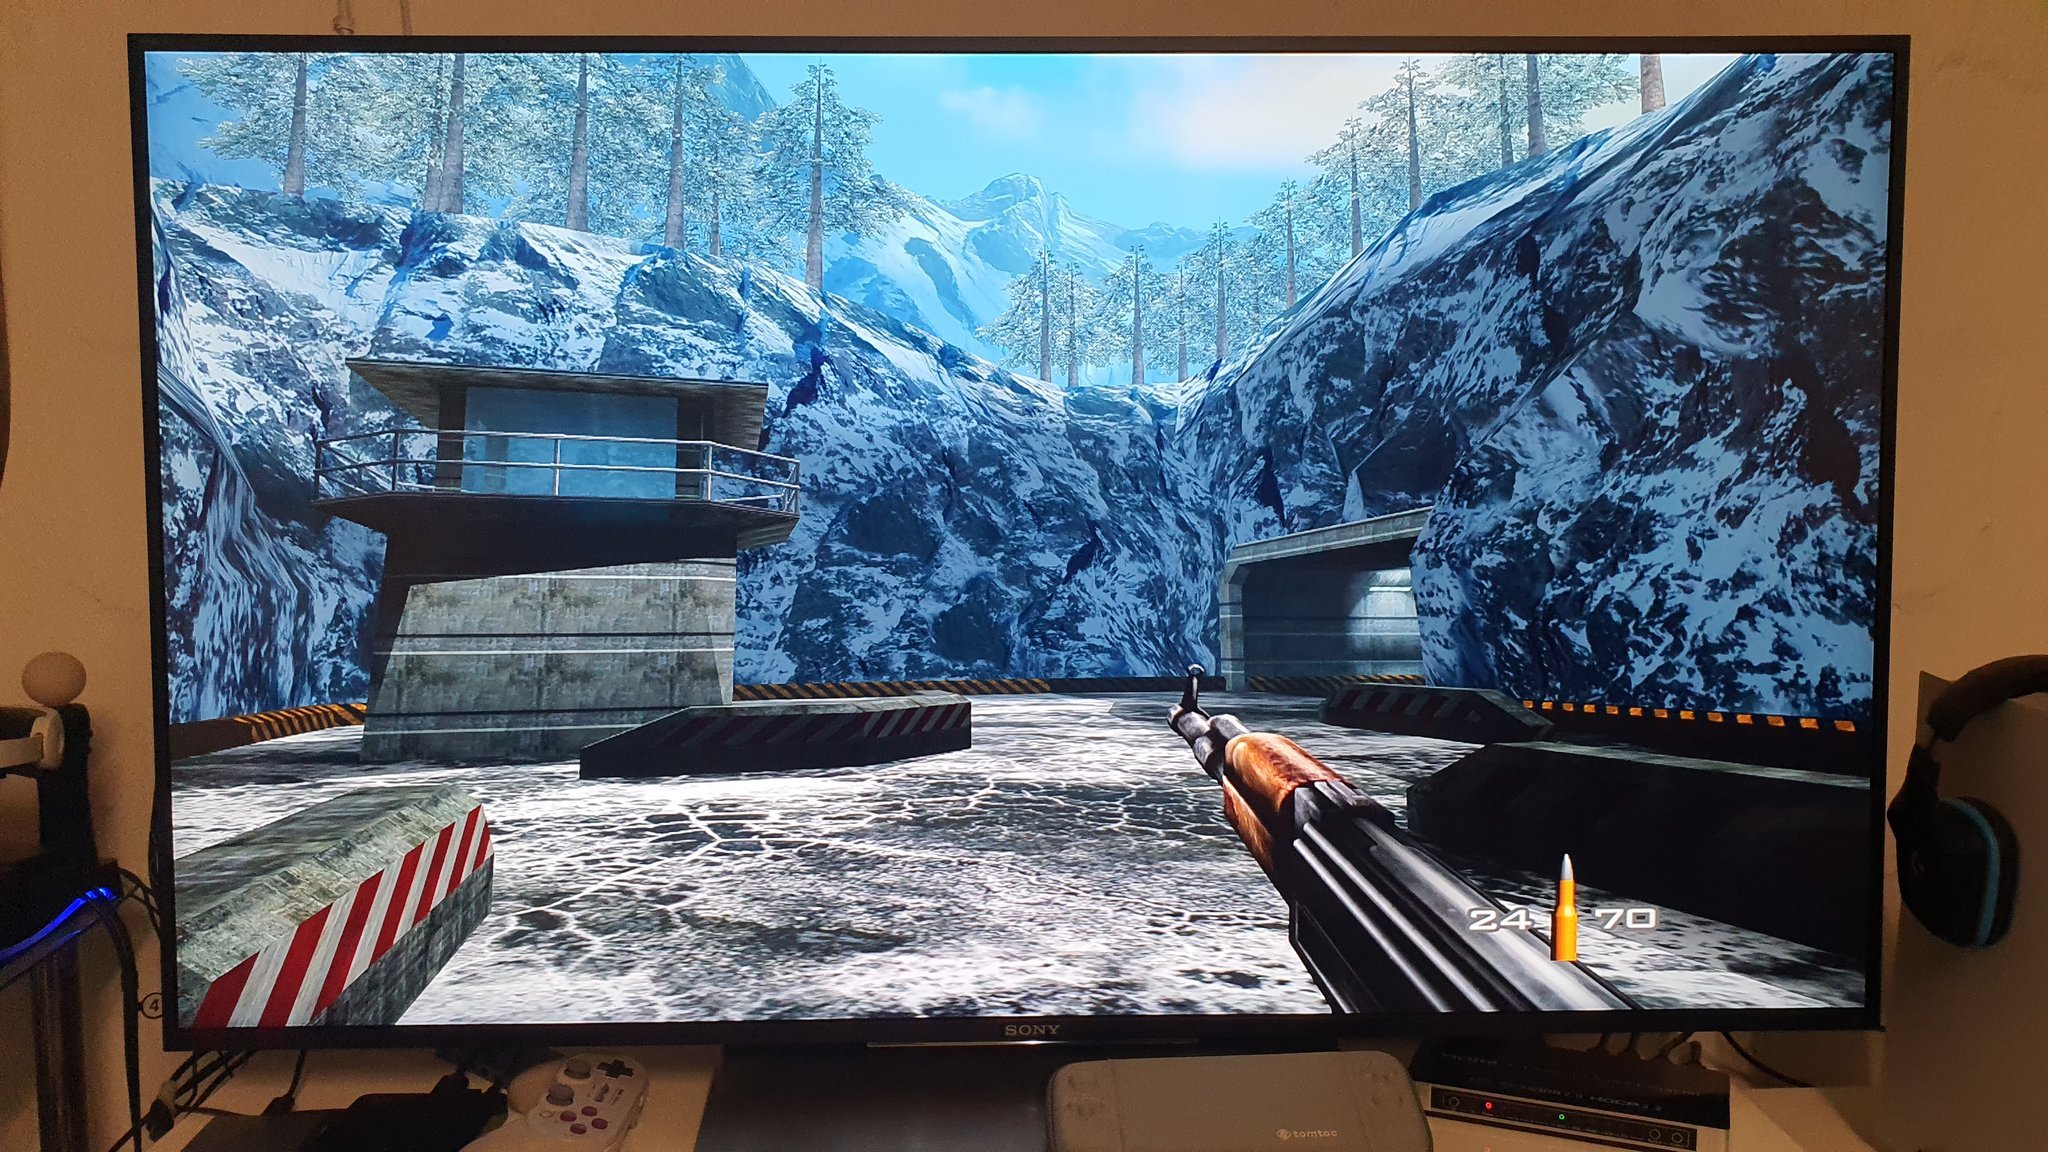 Canceled GoldenEye 007 Remaster ROM For Xbox Has Leaked To